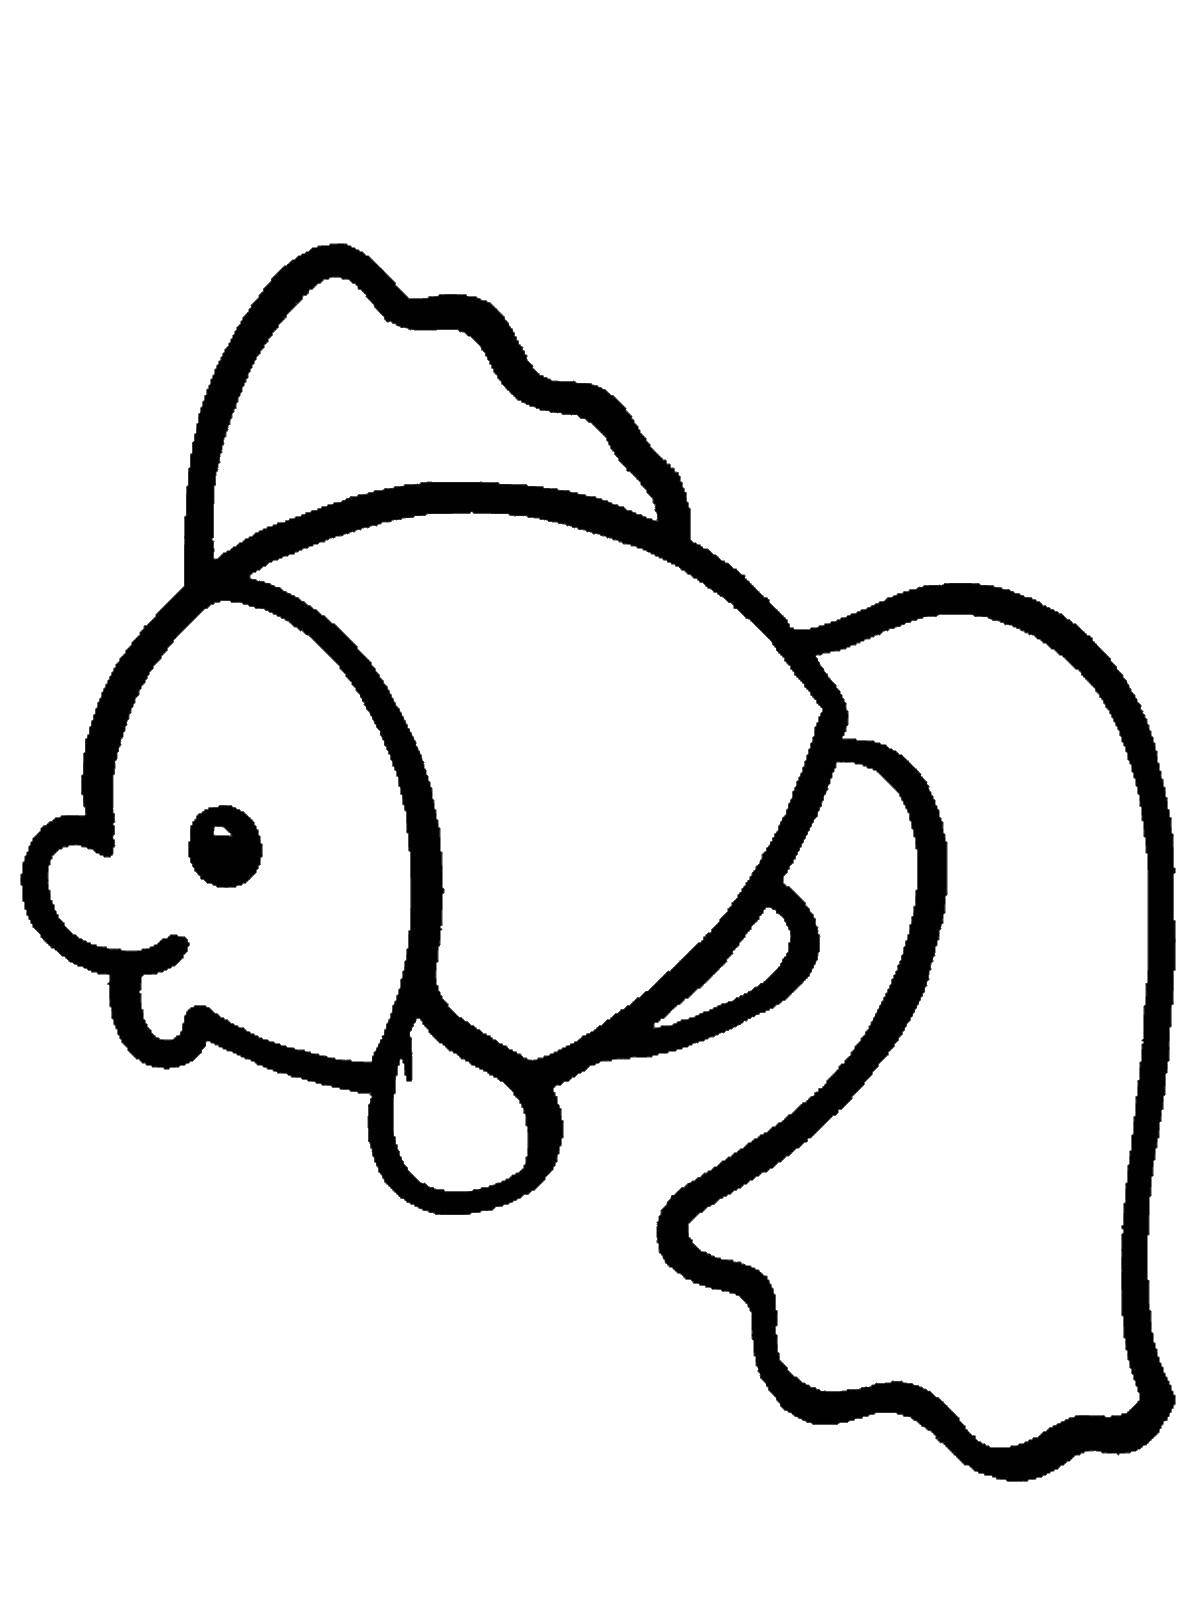 Coloring Goldfish. Category Coloring pages for kids. Tags:  gold fish.